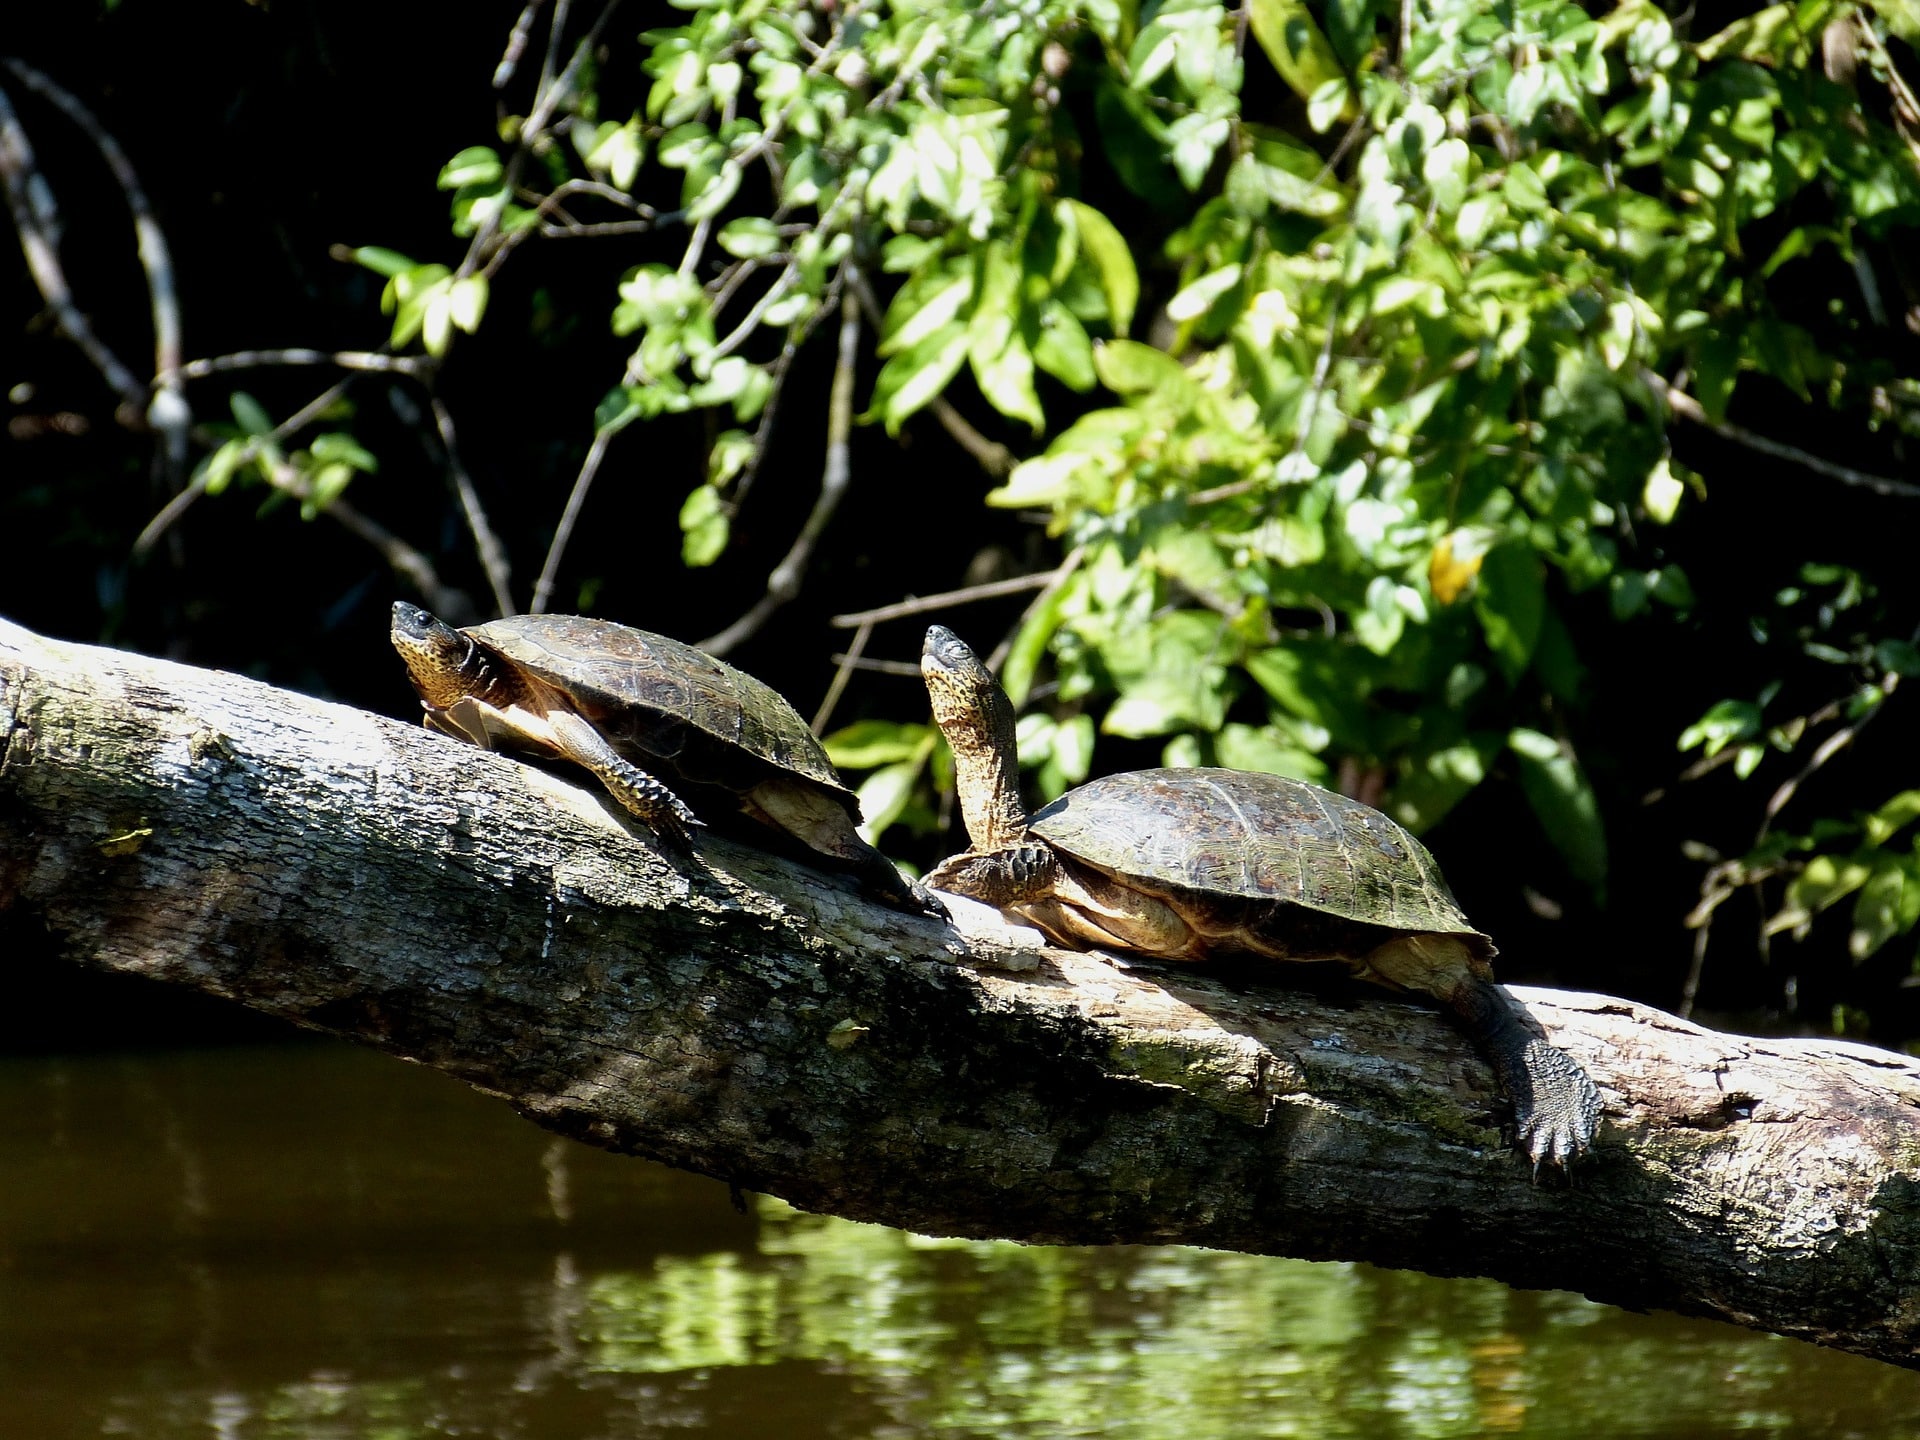 Tortuguero is one of the most beautiful places to visit in Costa Rica